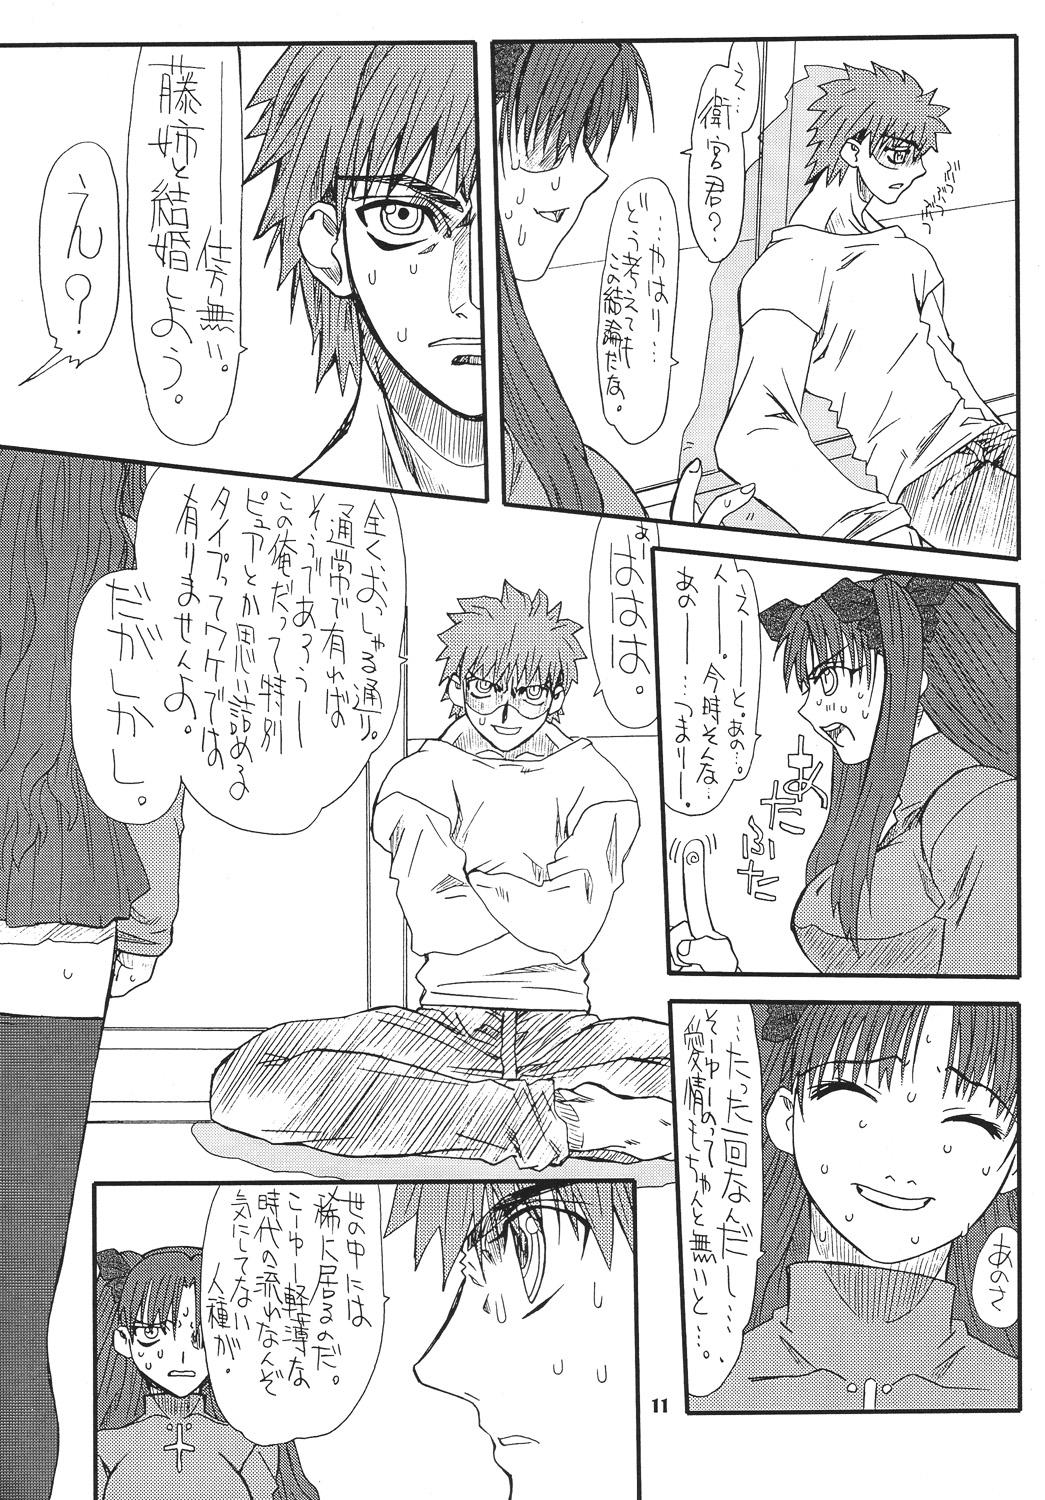 Perra Akihime San - Fate stay night Straight - Page 11